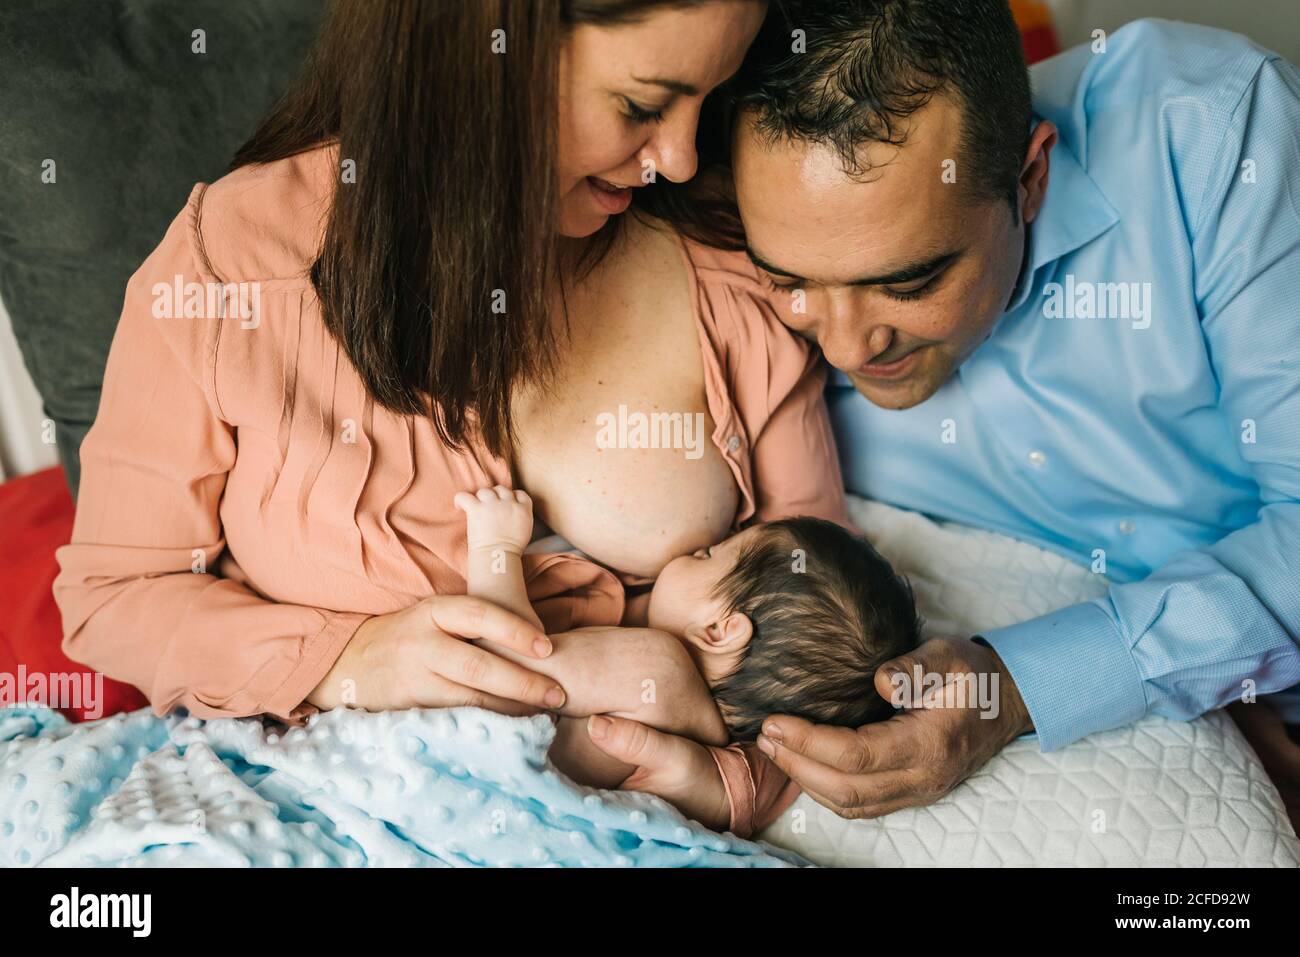 https://c8.alamy.com/comp/2CFD92W/from-above-faceless-mother-and-father-holding-on-hands-and-breastfeeding-newborn-baby-wrapped-in-blanket-on-bed-at-home-2CFD92W.jpg